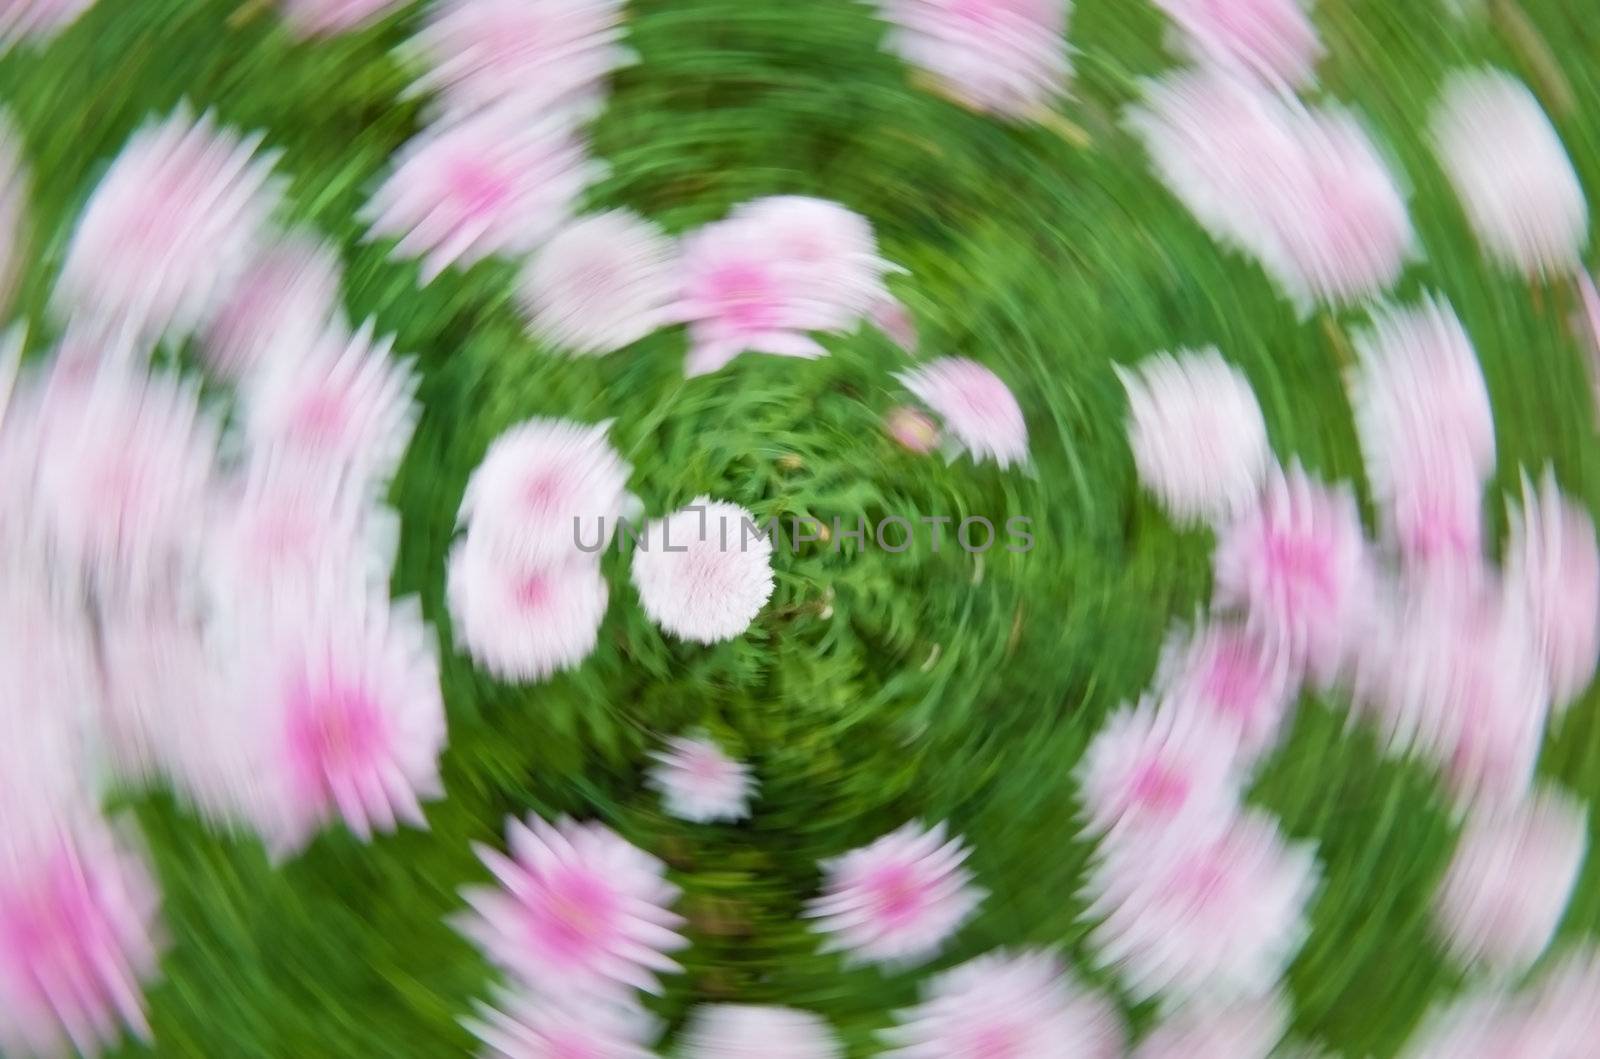 Artistic camera effect creating a vortex from a flower bed 